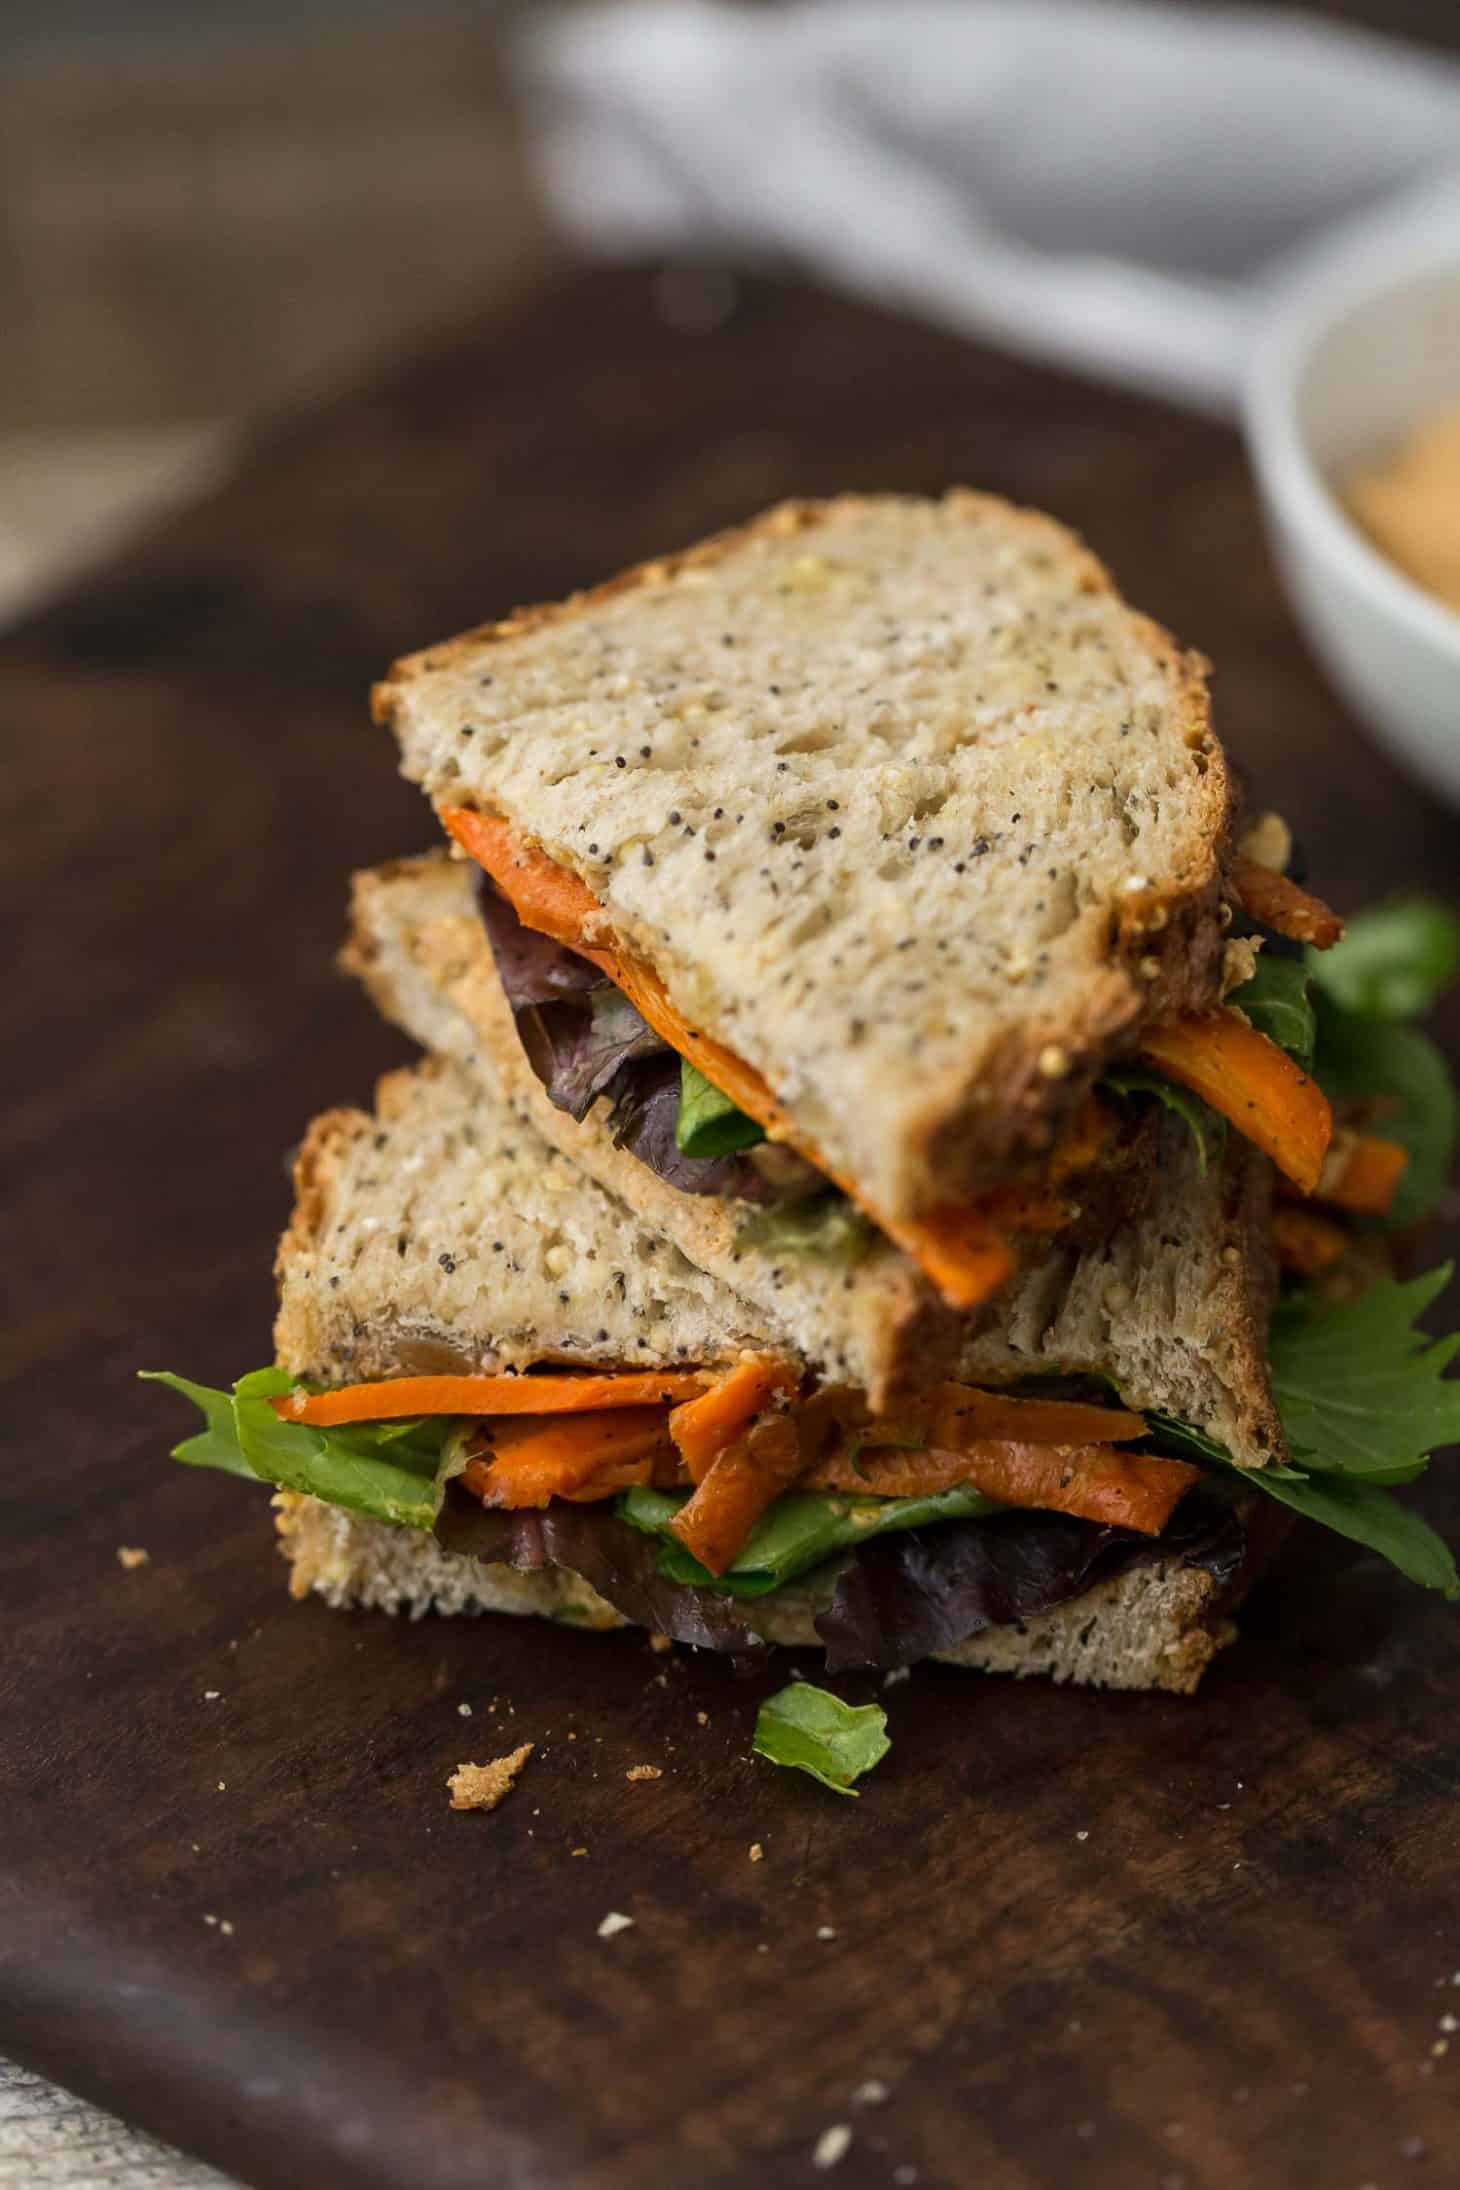 Roasted Carrot Sandwich with Sunflower Cream